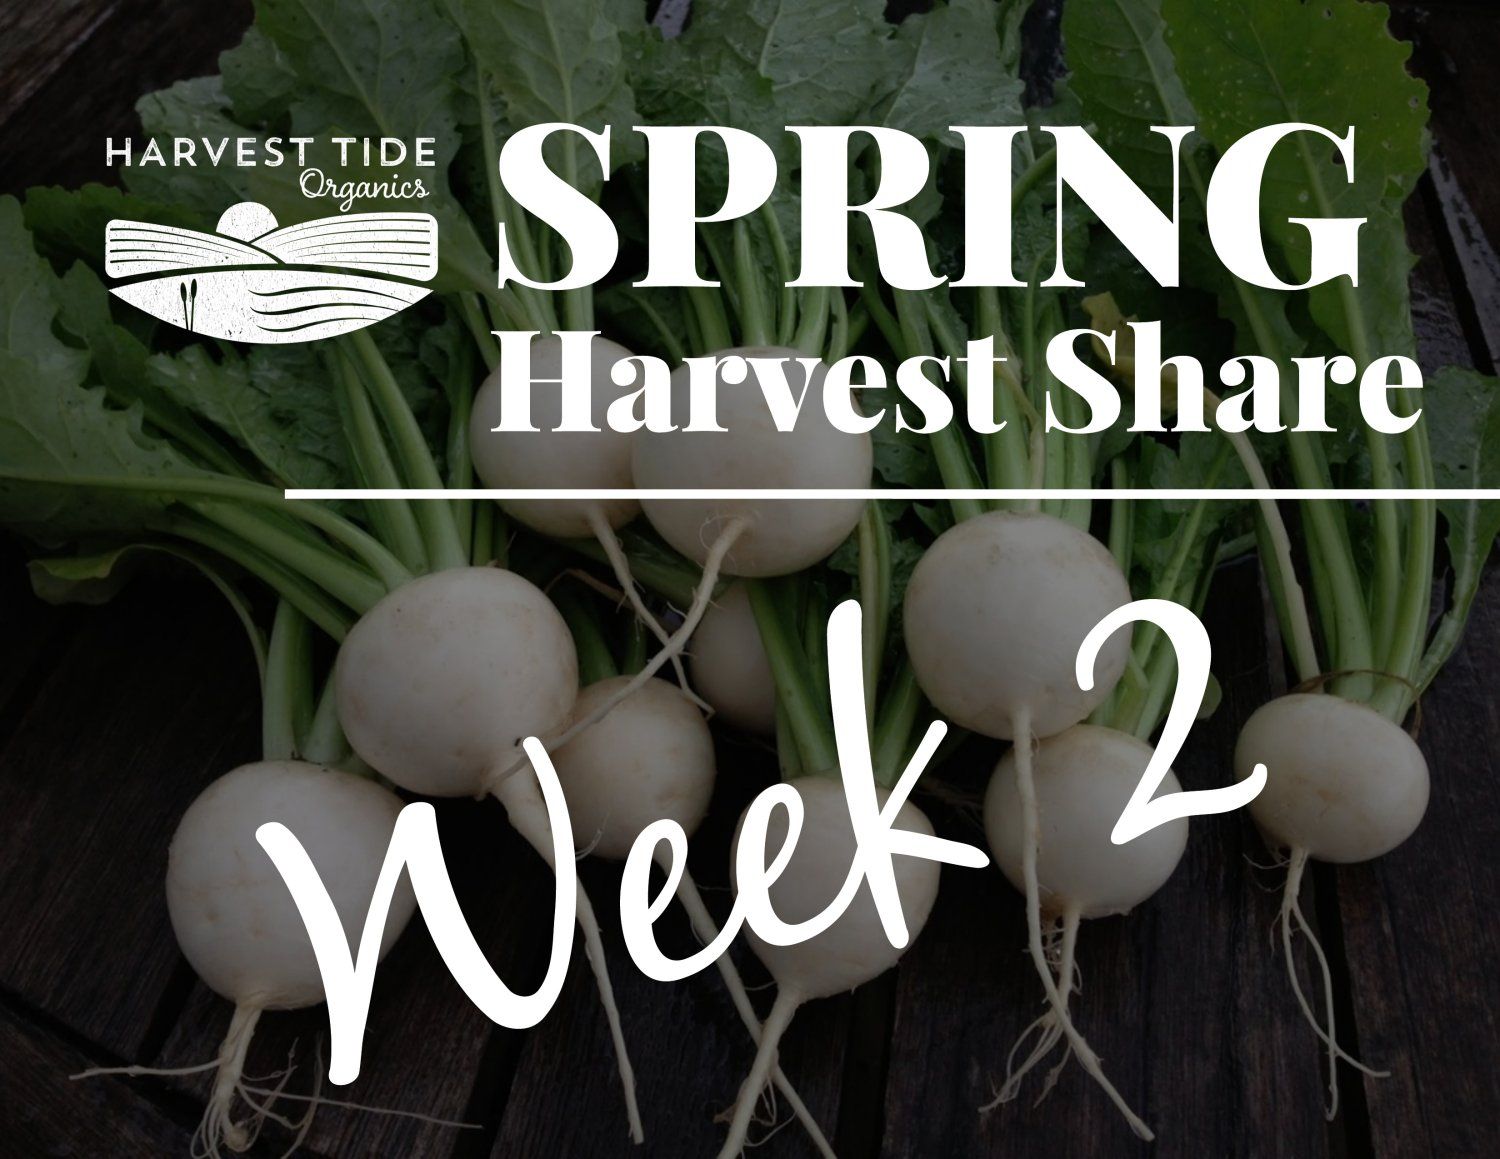 Previous Happening: Spring Harvest Share - Week 2